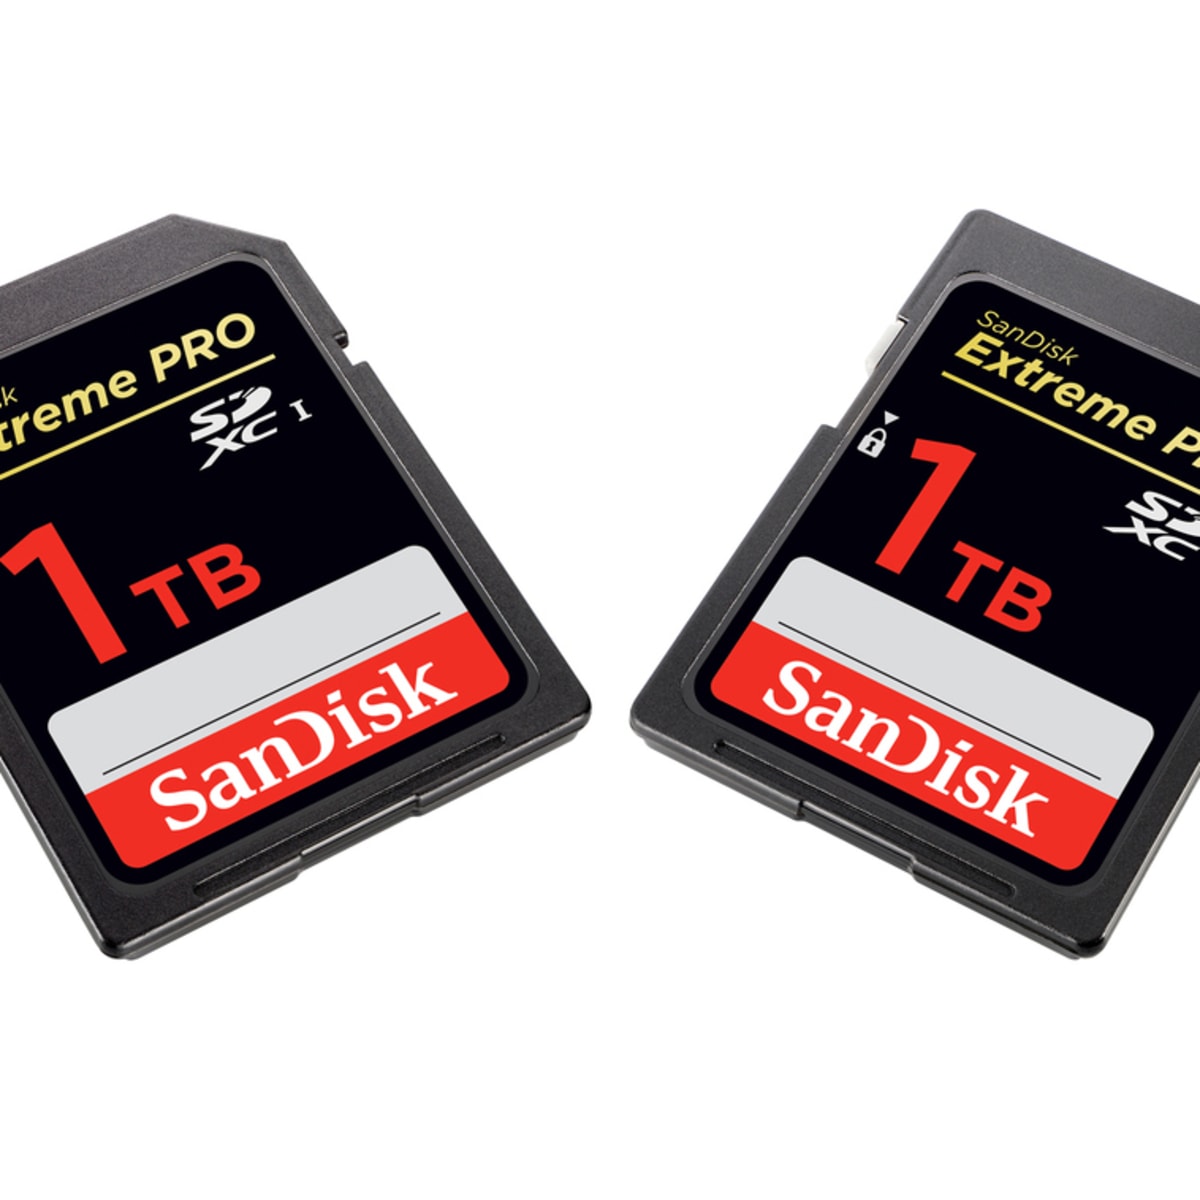 7 Things We'd Do With a 1 Terabyte SD Card